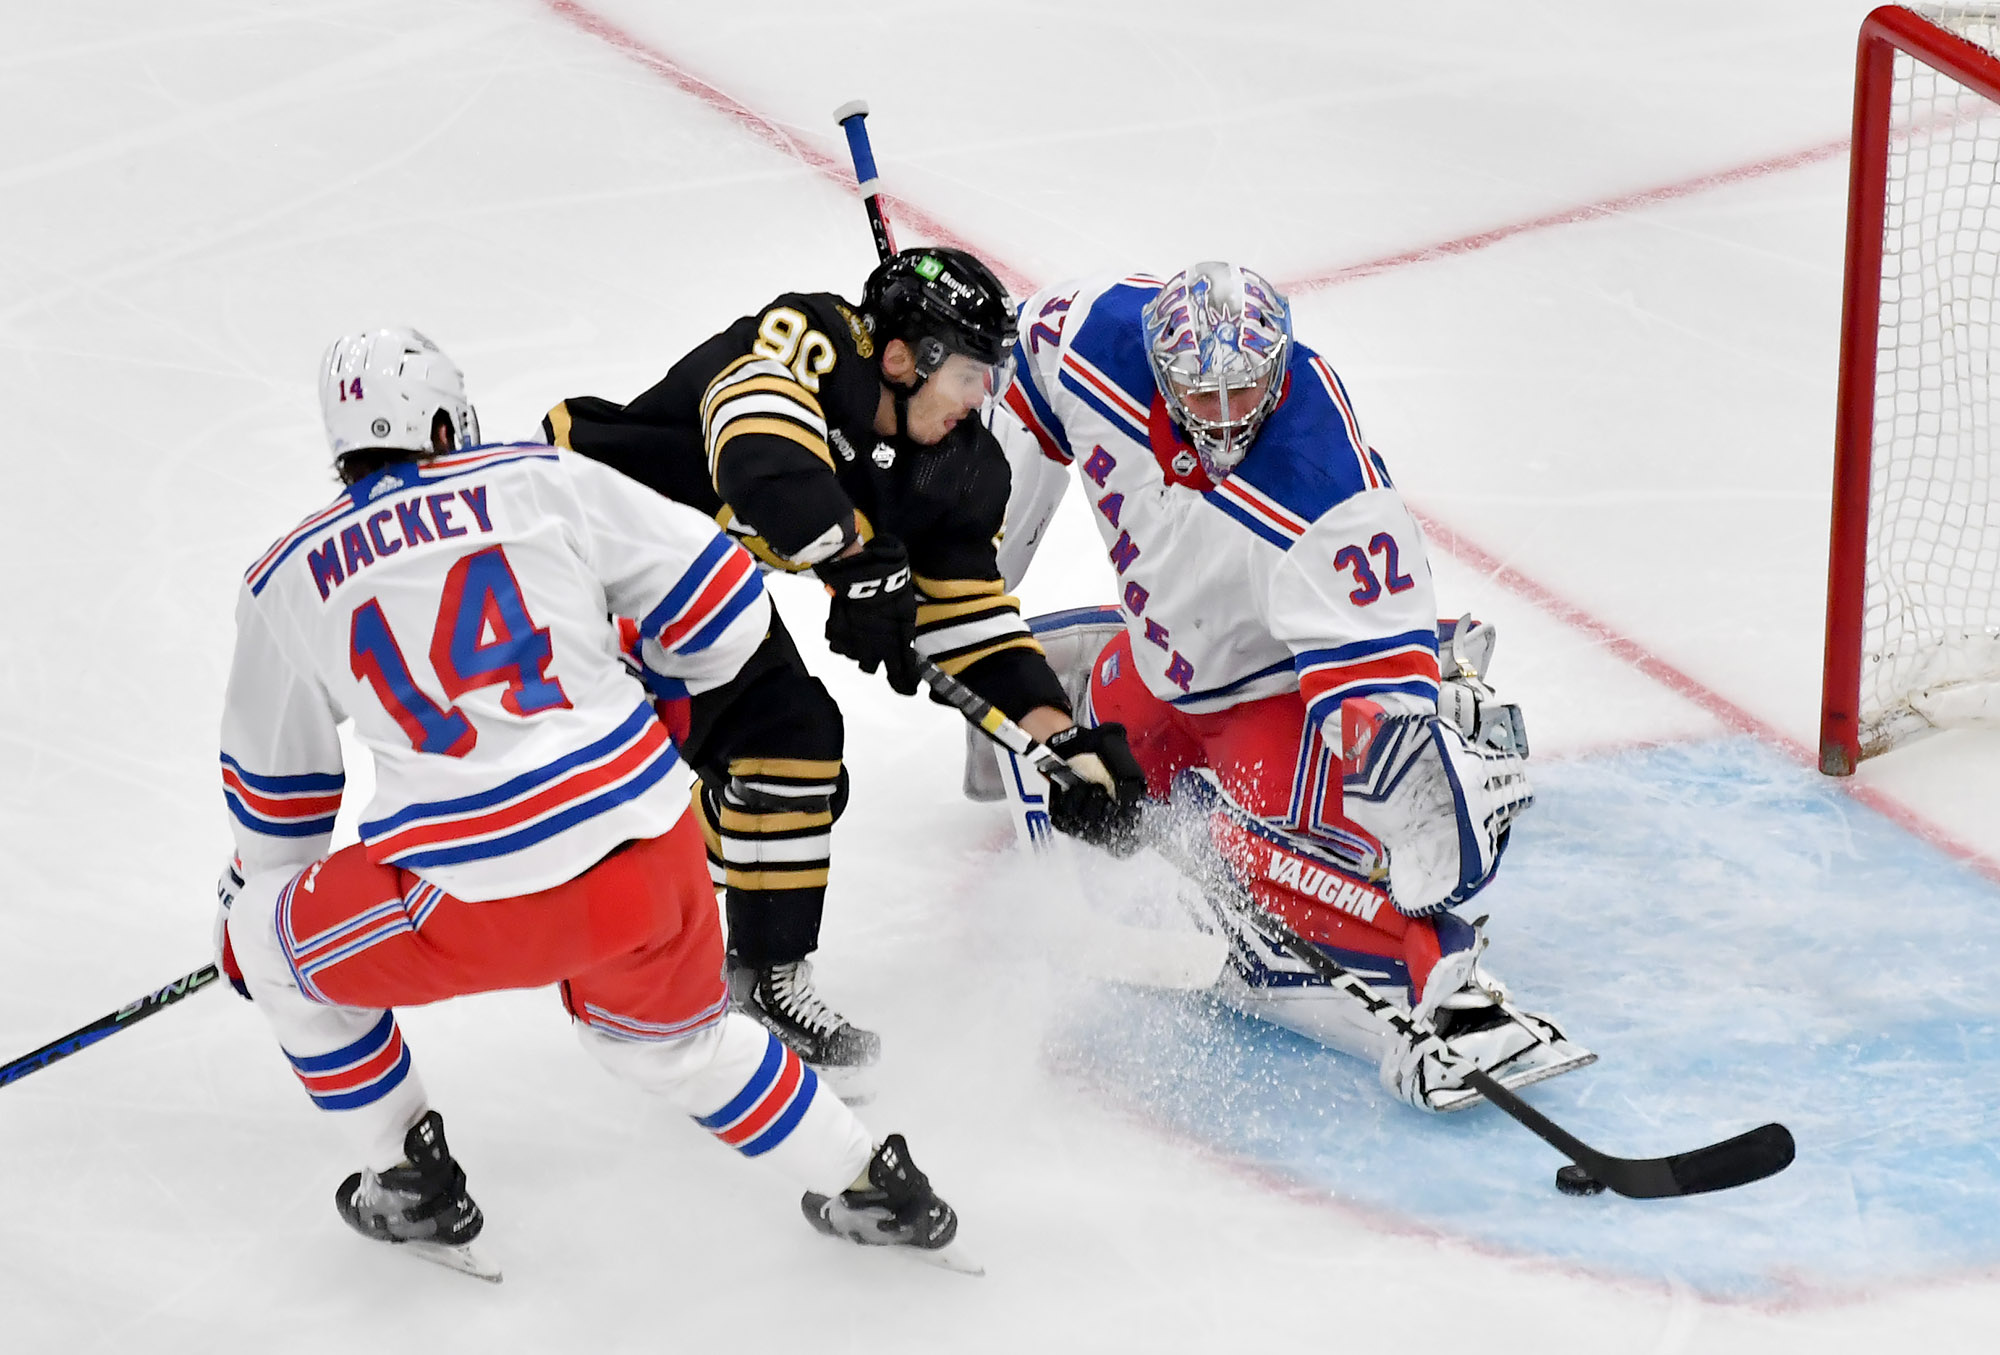 The Pasta Principle: Pastrnak primed for year 2